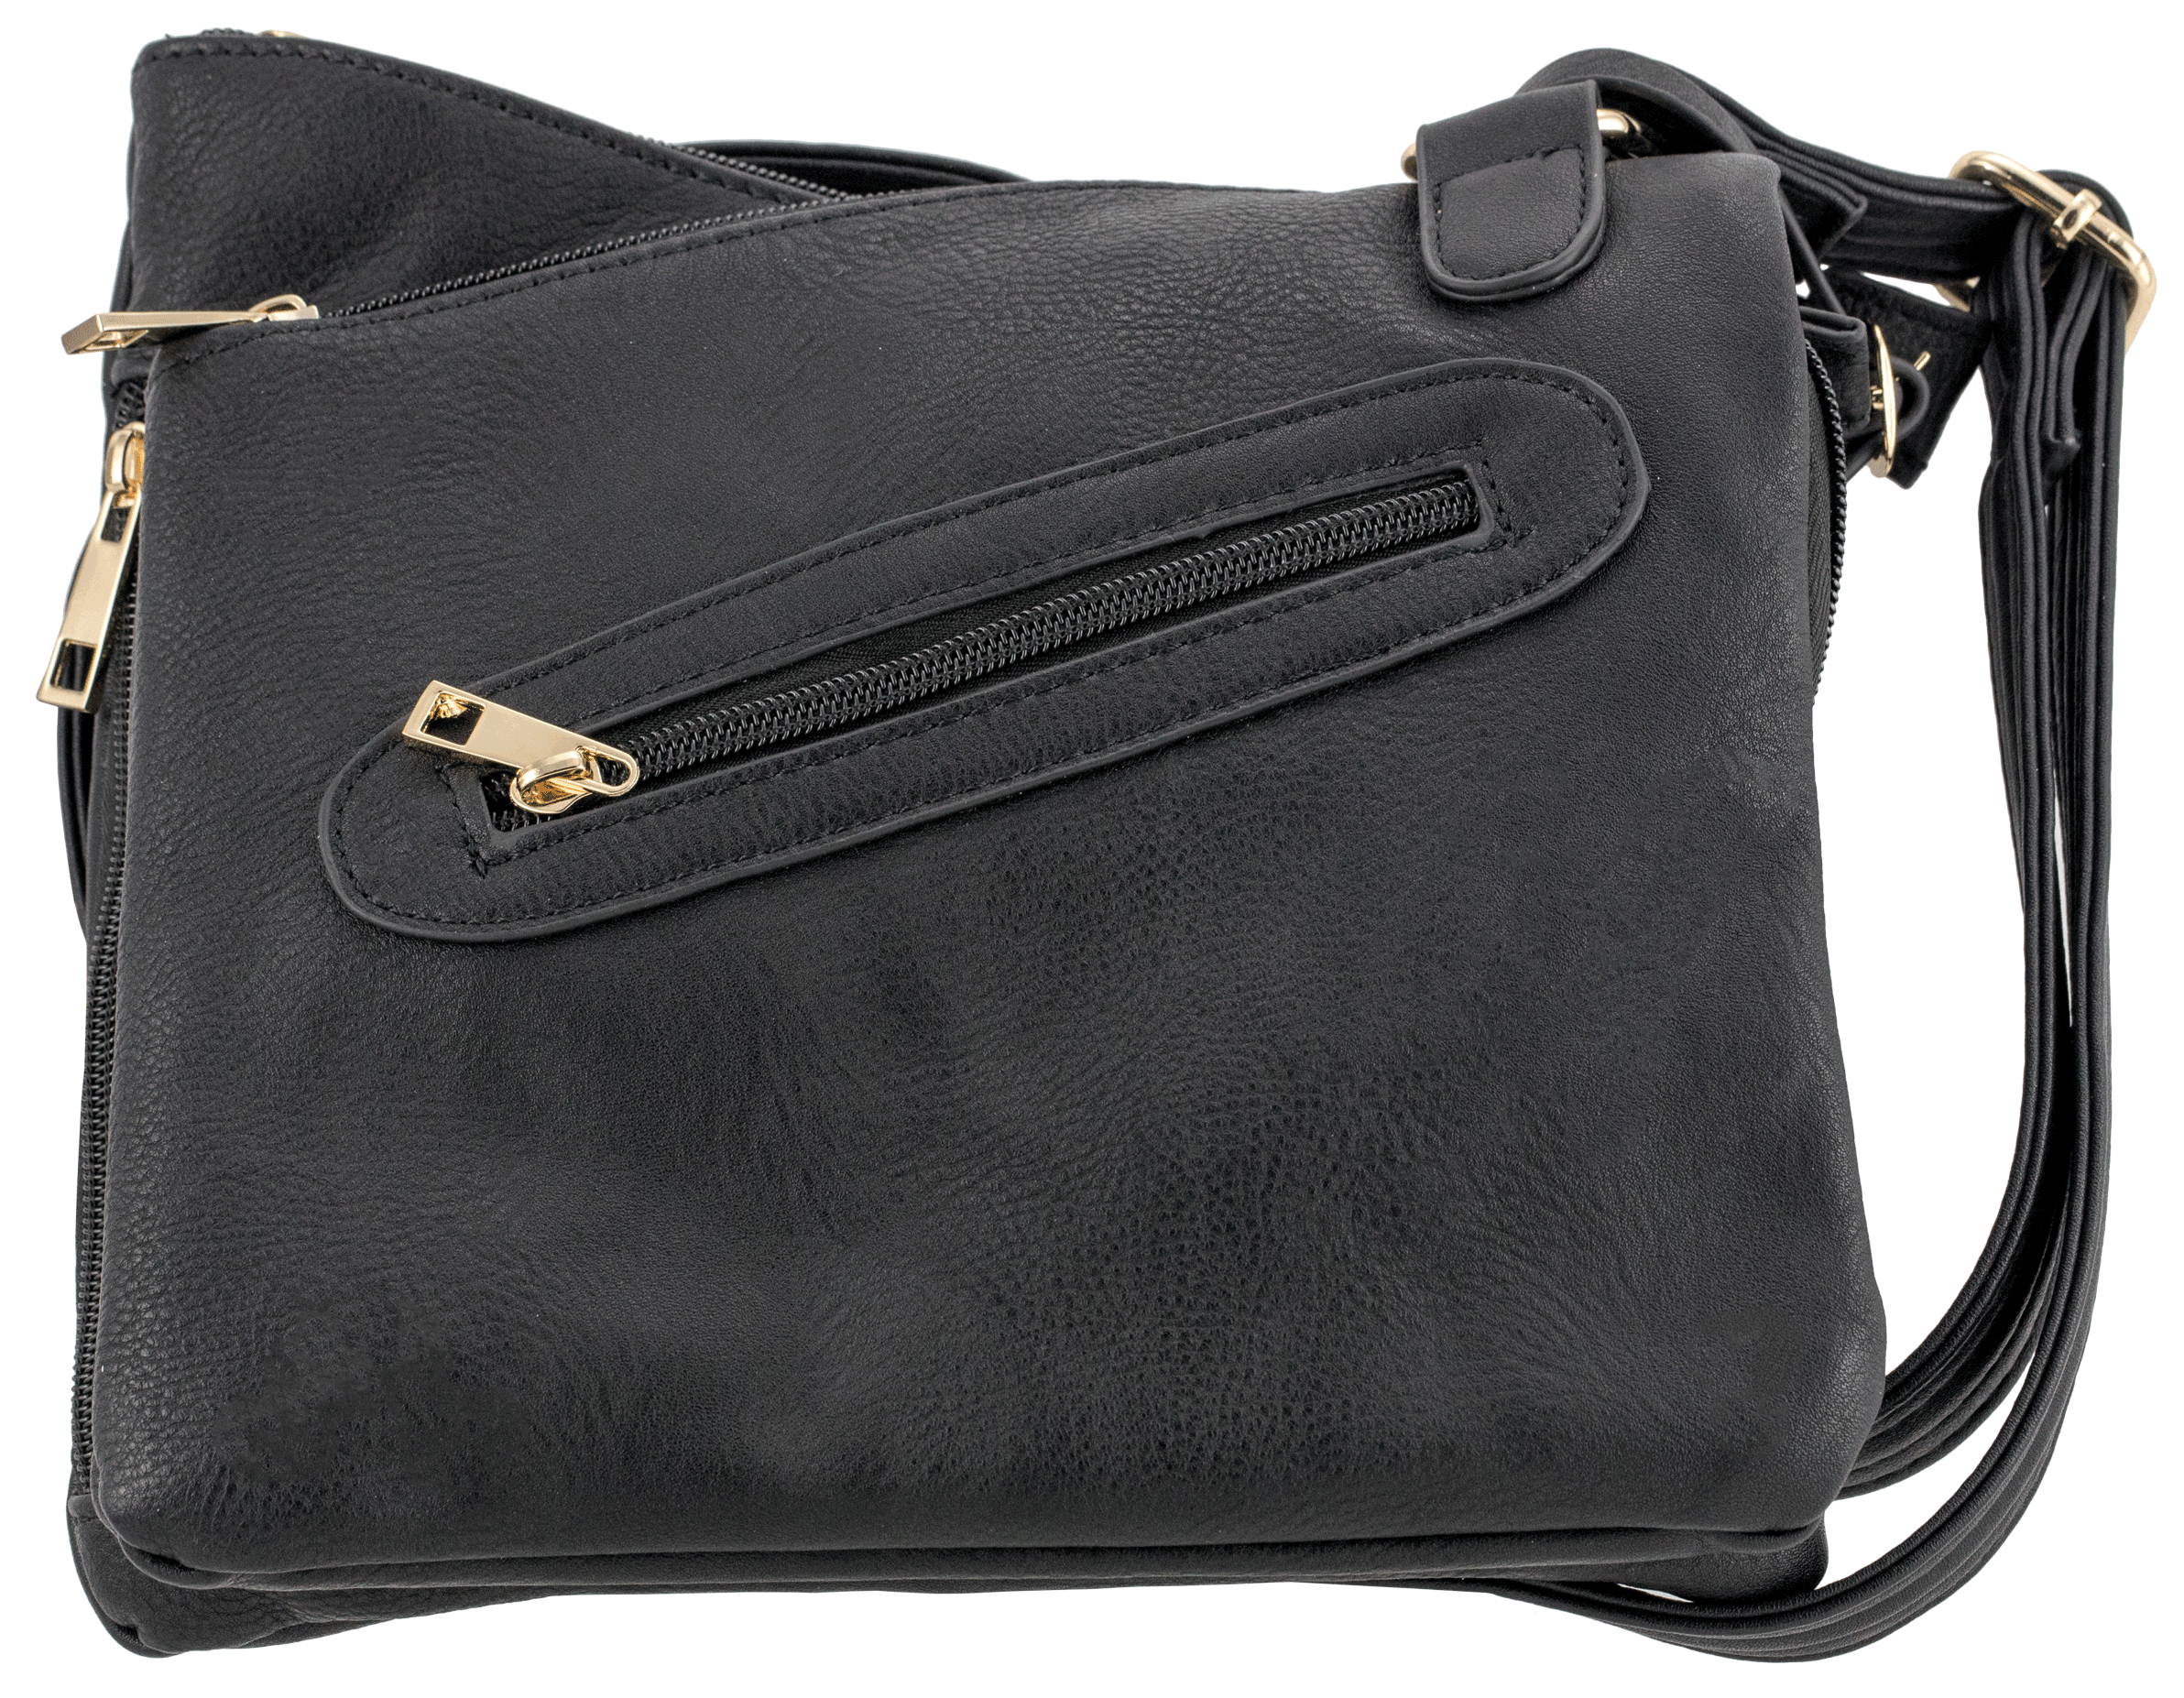 Bulldog BDP030 Cross Body Purse w/Holster Black Leather for Small Autos ...